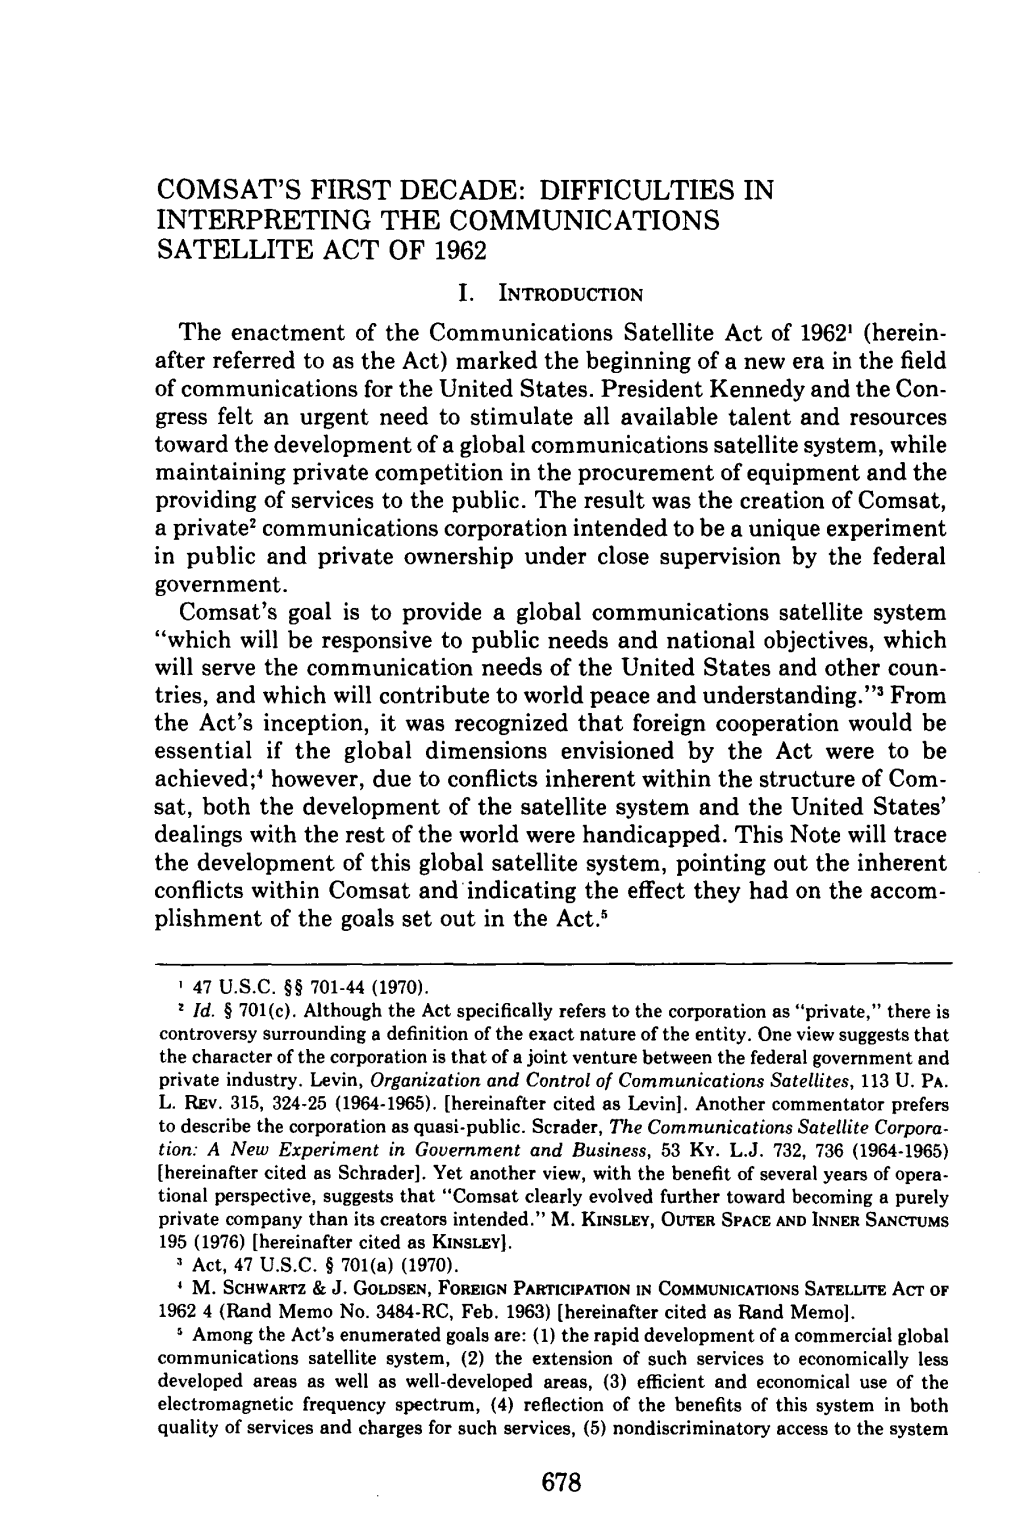 Comsat's First Decade: Difficulties in Interpreting the Communications Satellite Act of 1962